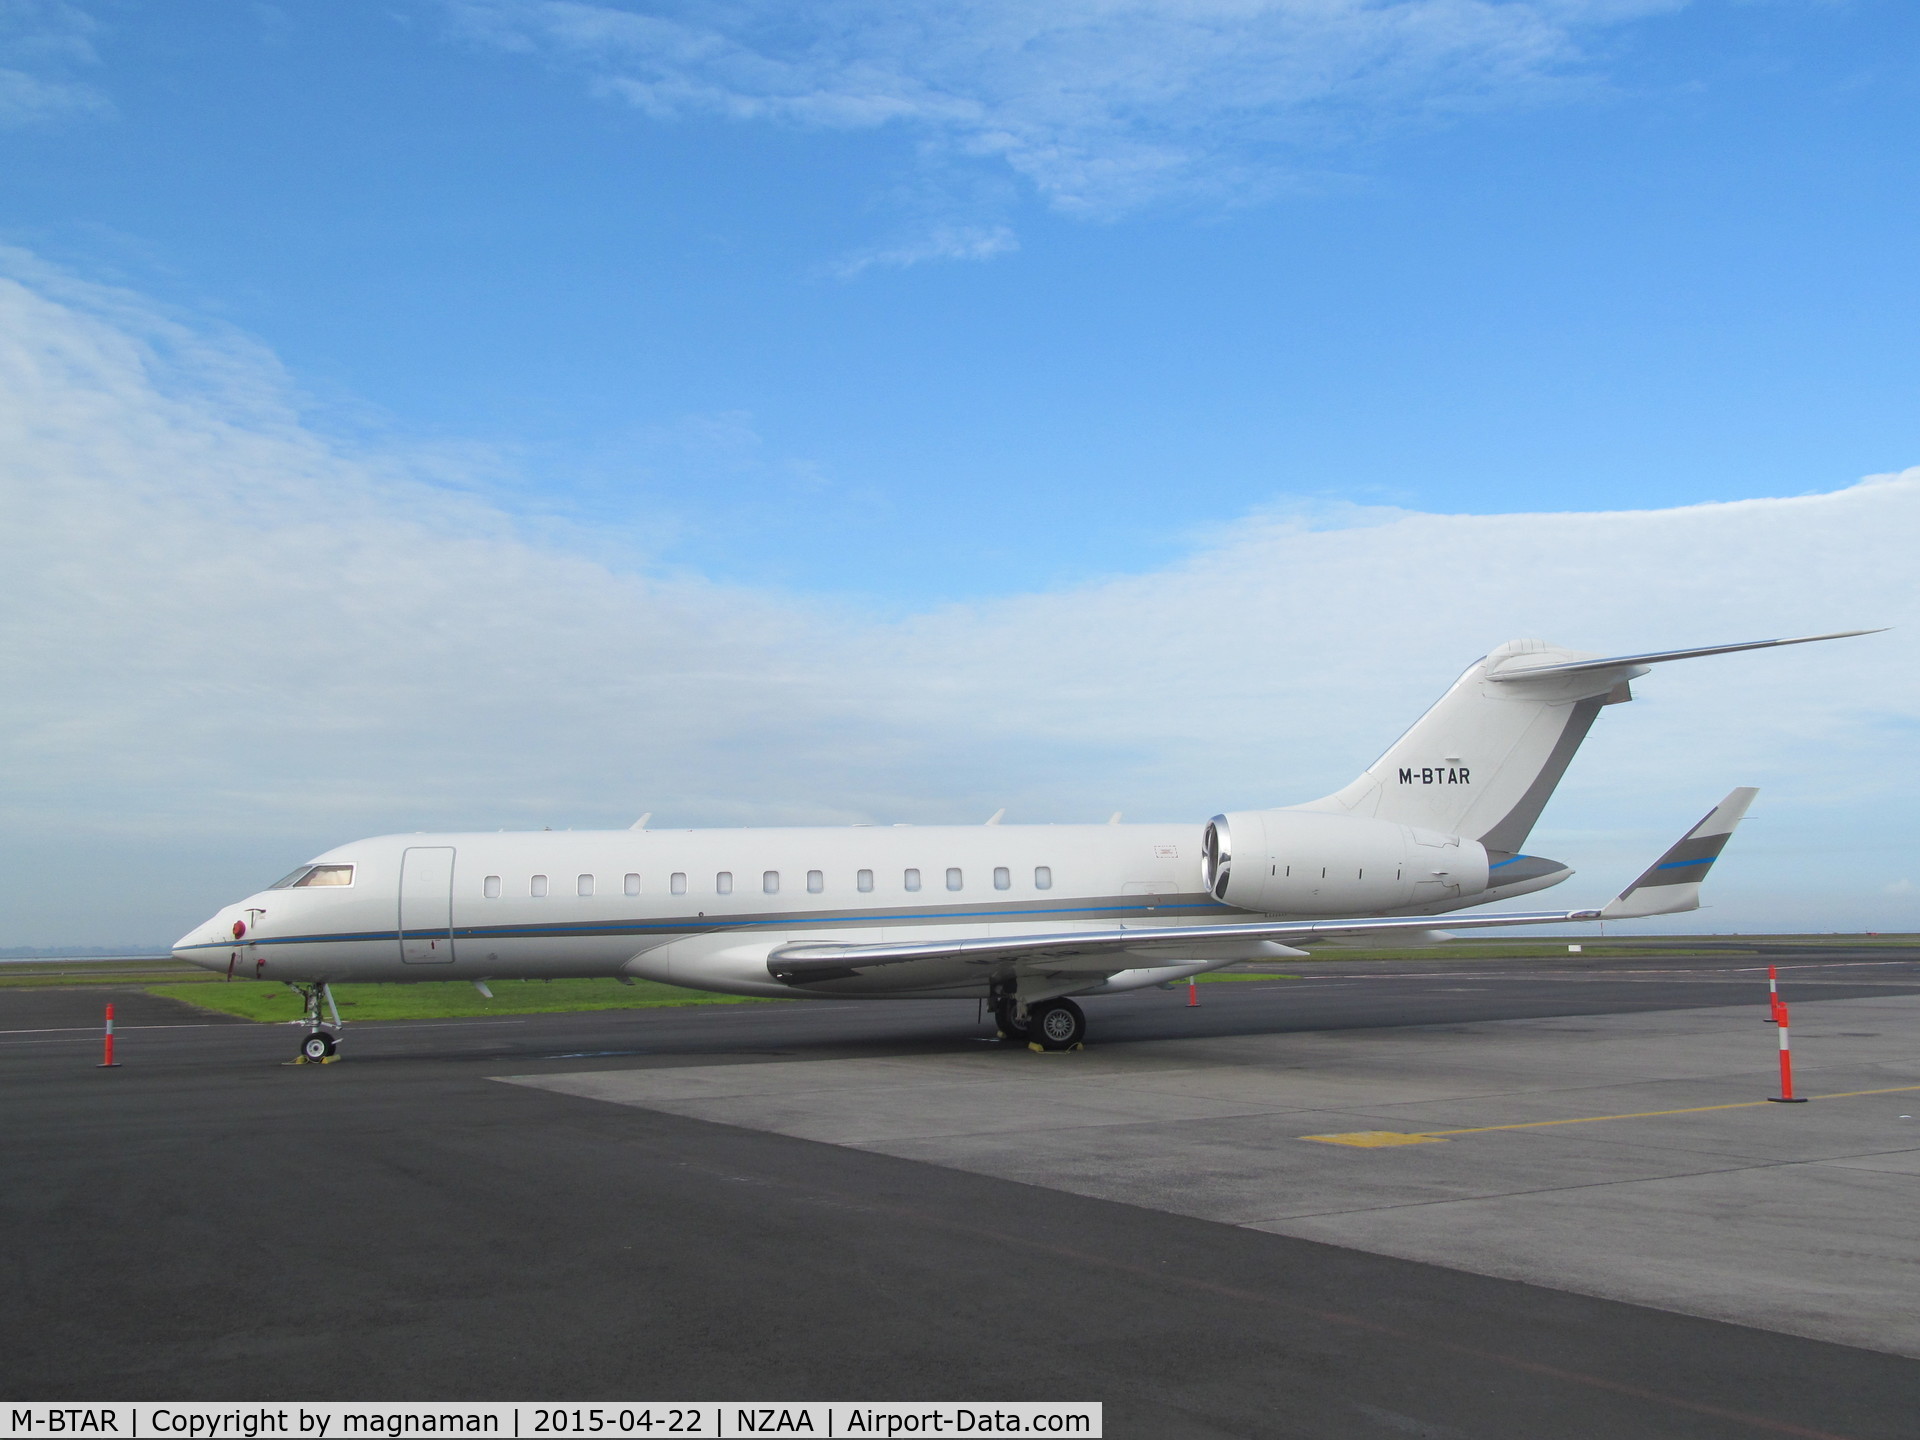 M-BTAR, 2007 Bombardier BD-700-1A10 Global Express C/N 9250, At AKL in from oz.